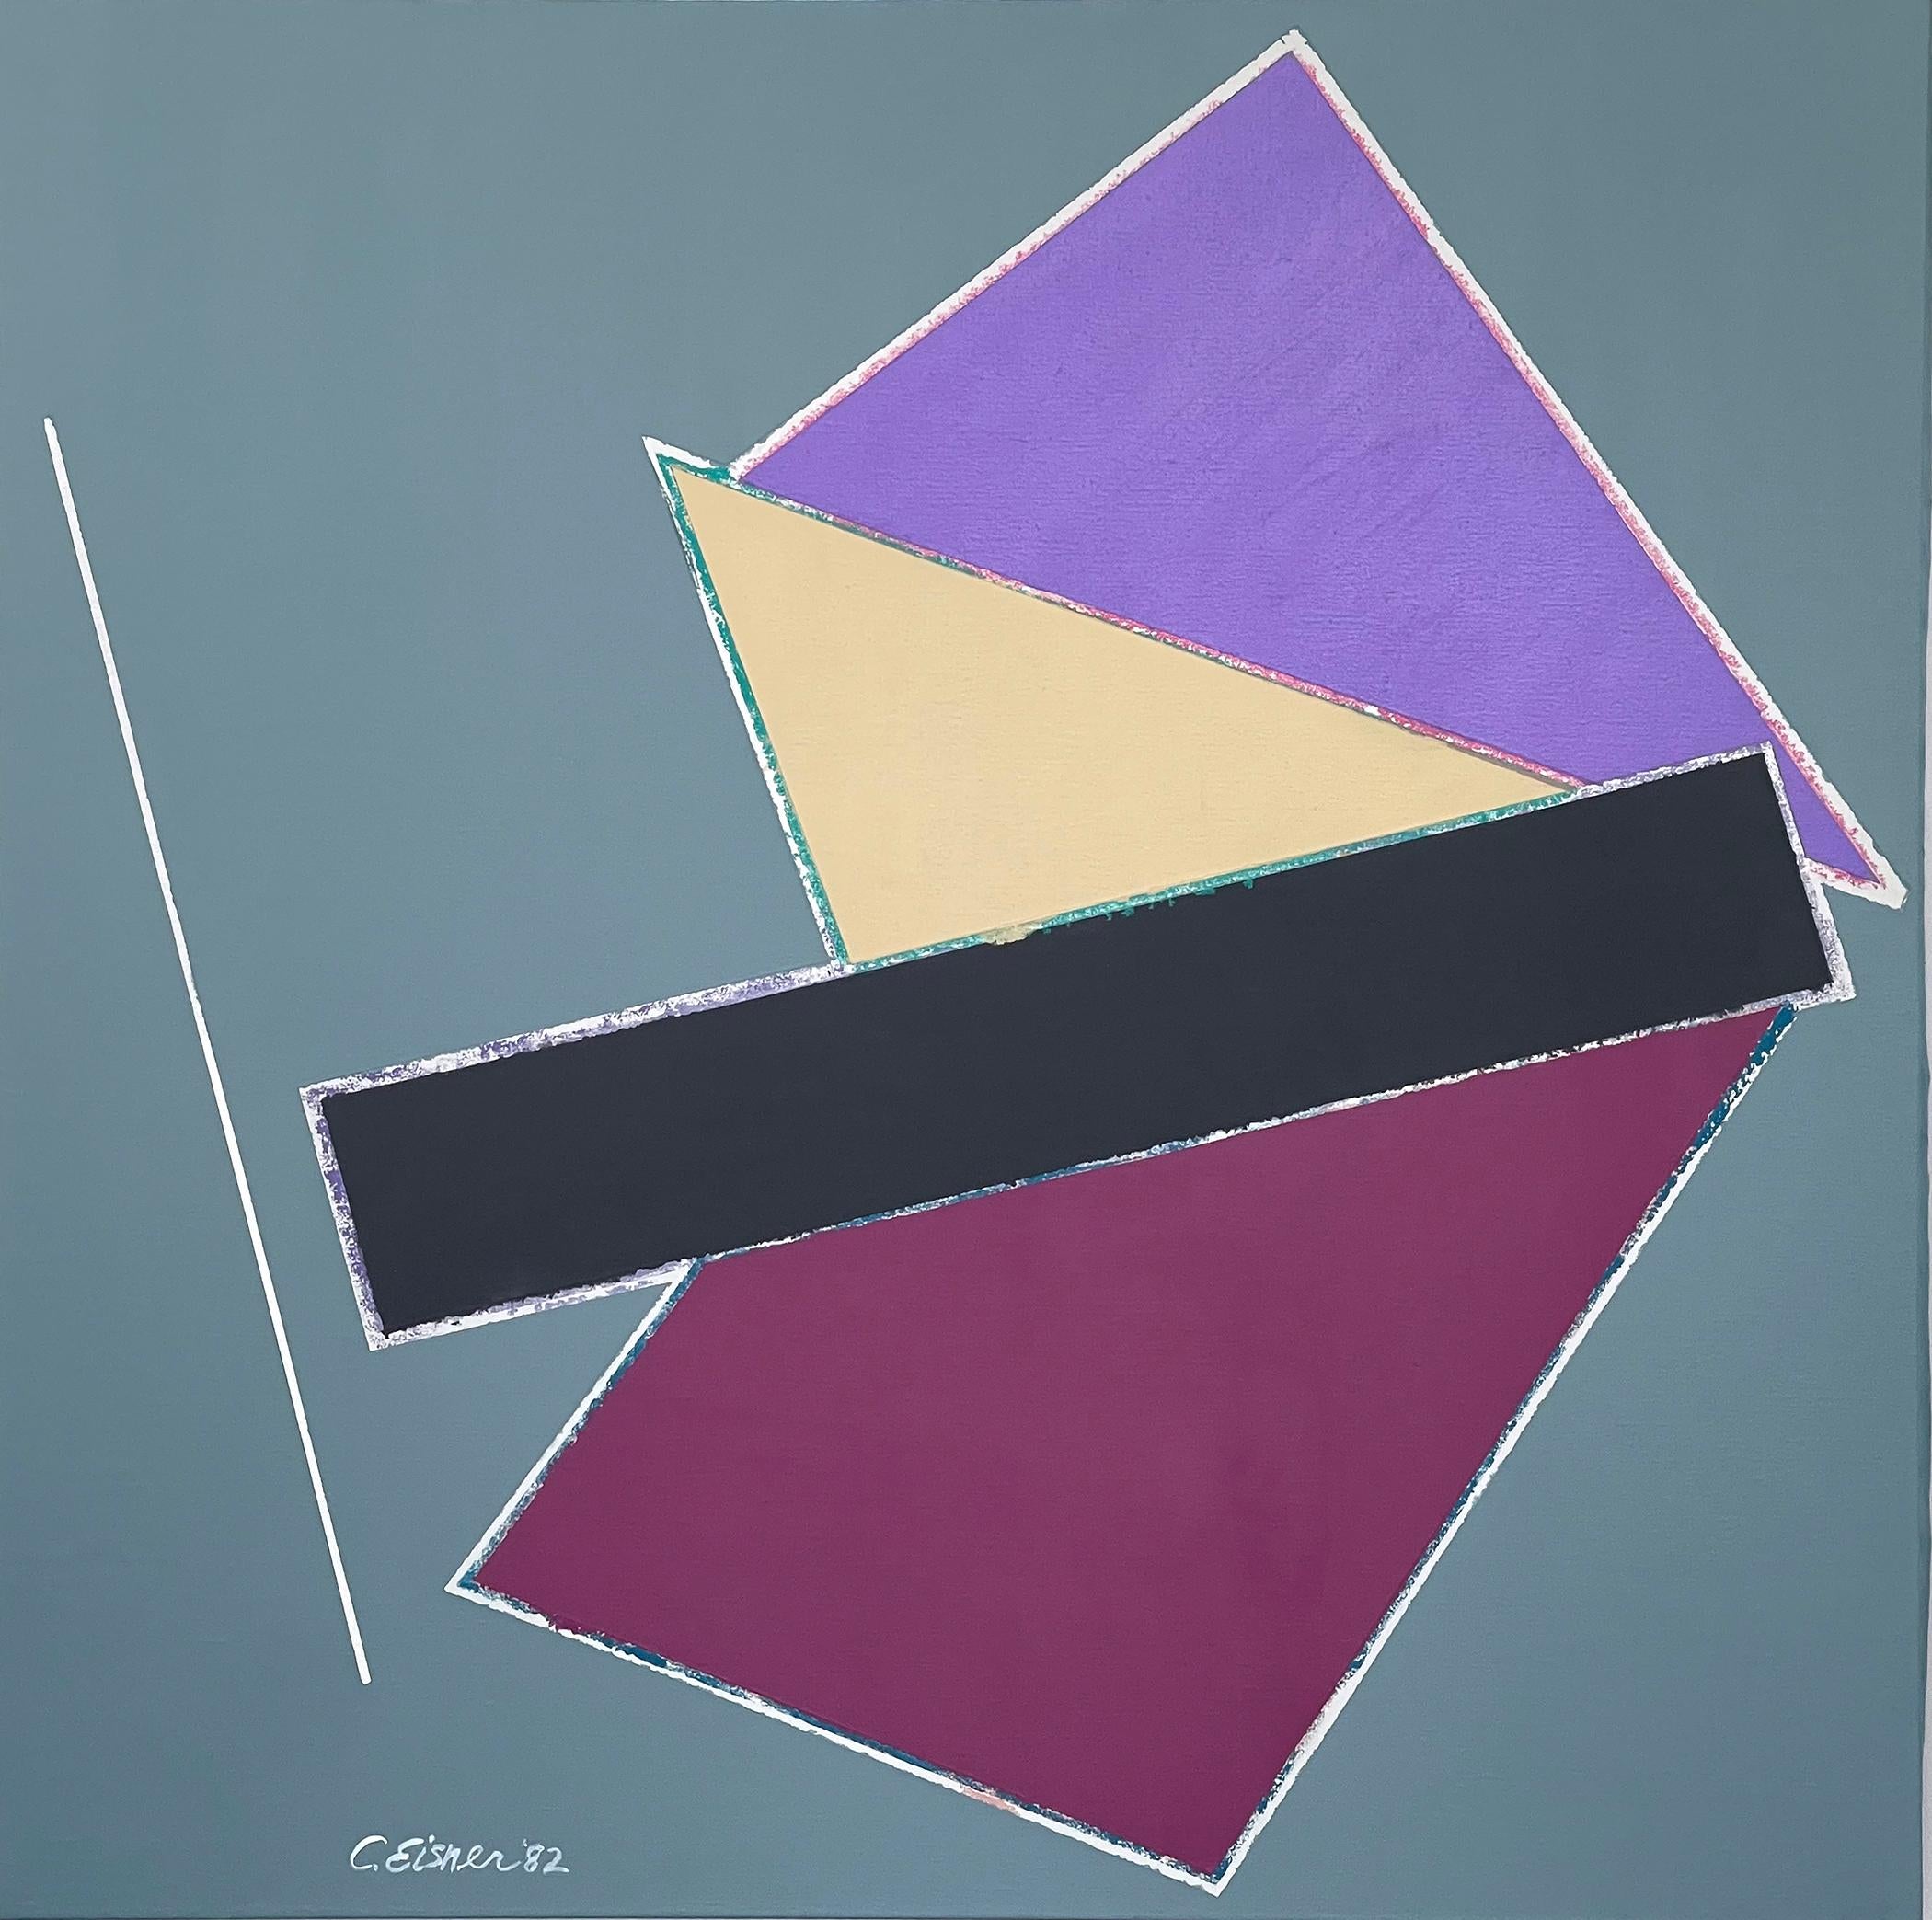 Carole Eisner Abstract Painting - Chira